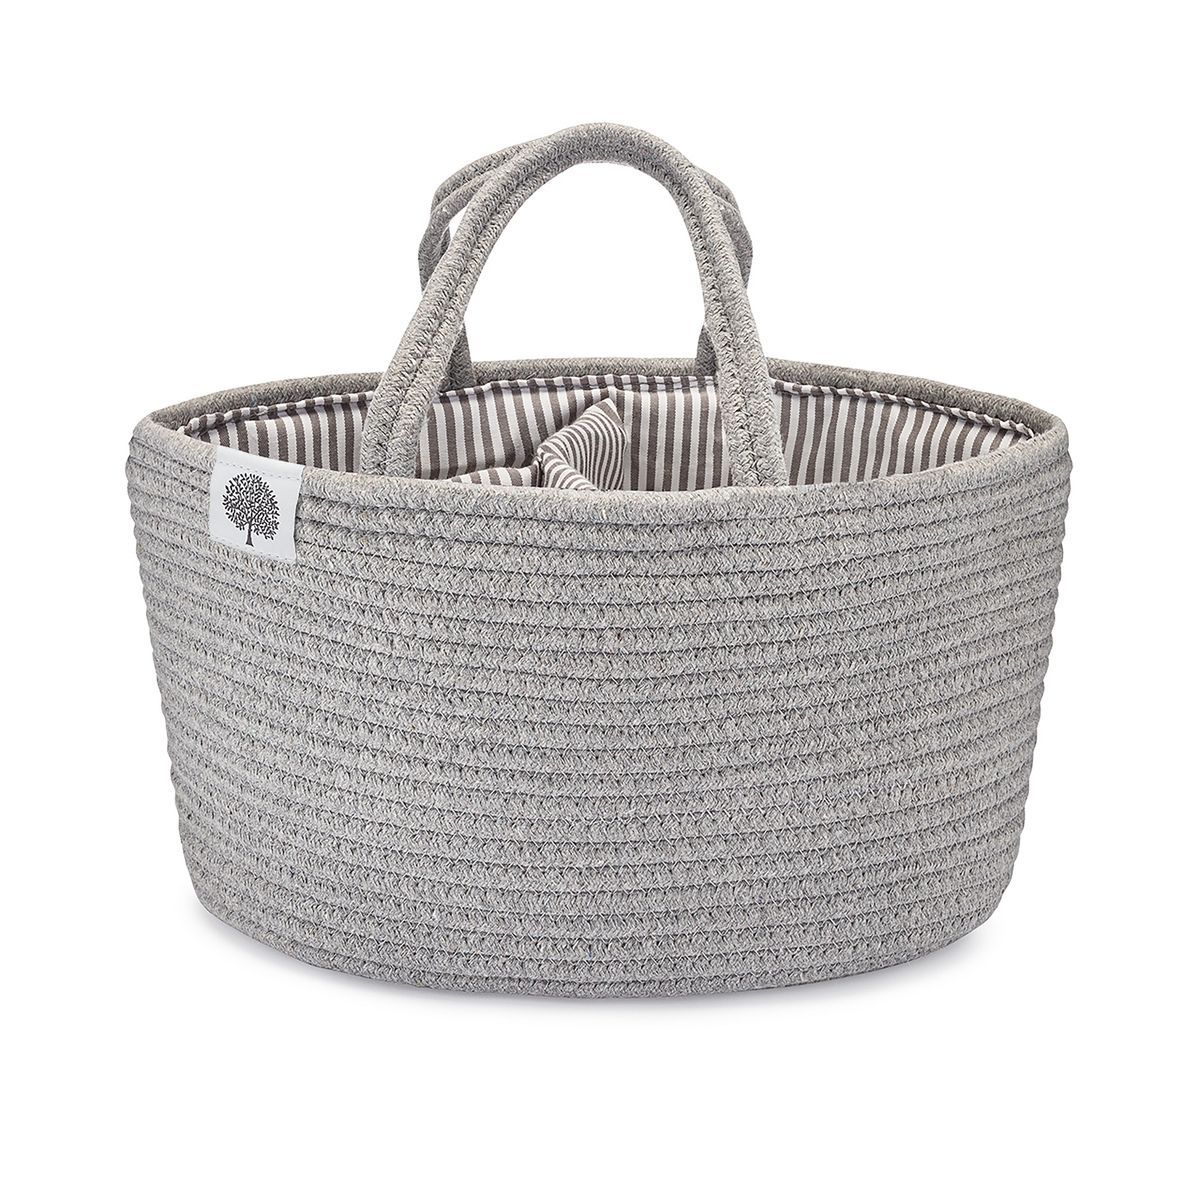 Parker Baby Co. Rope Diaper Caddy Organizer - Gray | Target